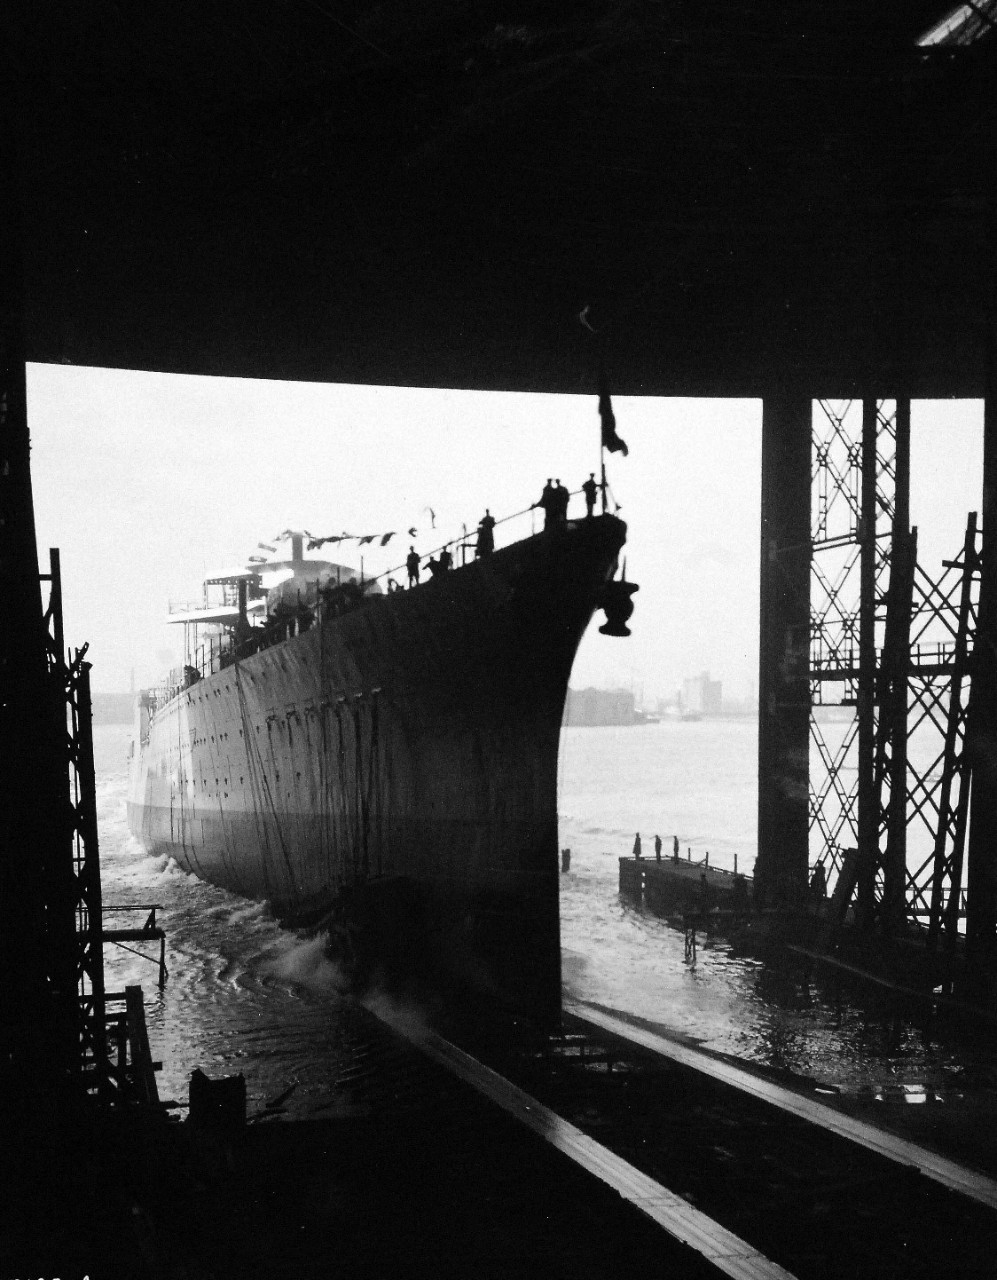 19-LC-61836b:    USS Indianapolis (CA- 35), 1931.    Going “down the ways” during launching at the New York Shipbuilding Corporation, November 7, 1931.   Indianapolis was commissioned on November 15, 1932 and was later sunk during World War II by Japanese submarine I-58 on July 30, 1945.   Official U.S. Navy Photograph, now in the collections of the National Archives.   (2015/2/3).   